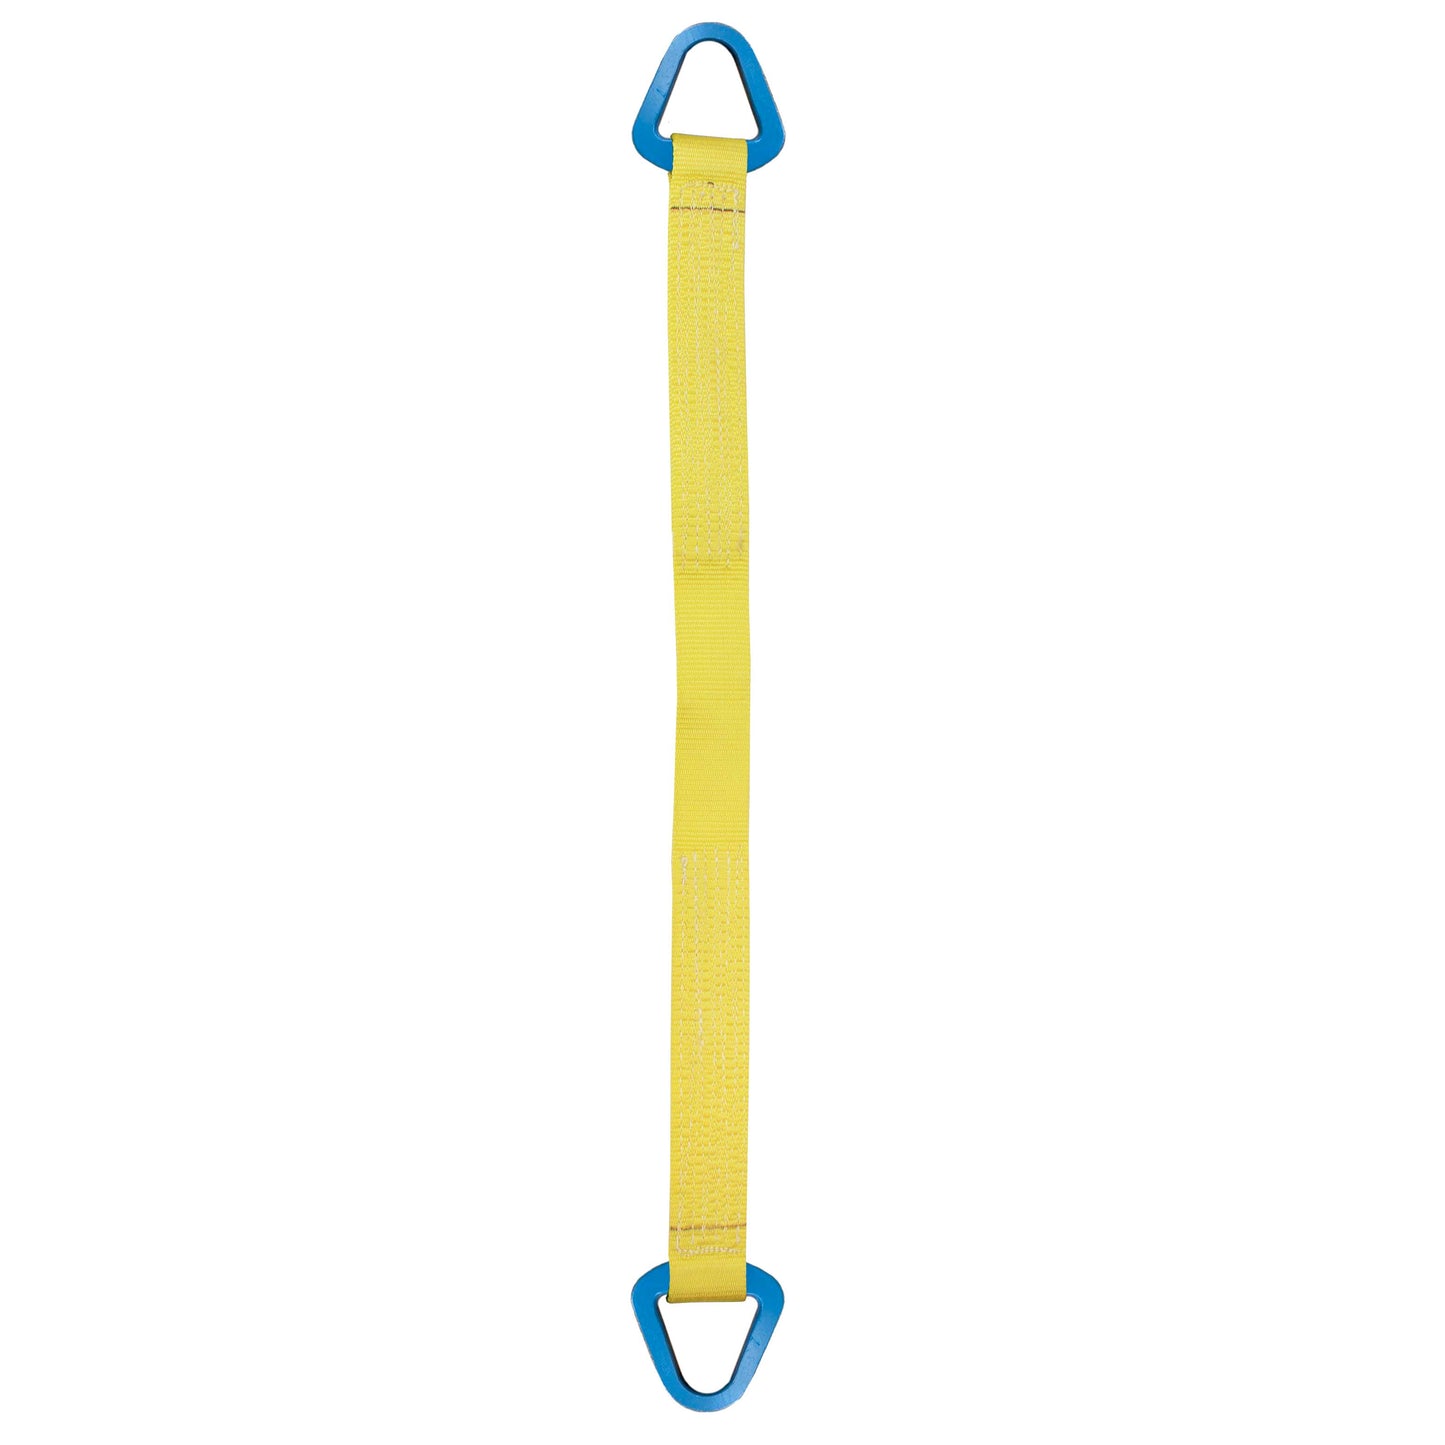 Nylon Lifting Sling Triangle 10 inch x 10 foot 2ply image 1 of 2